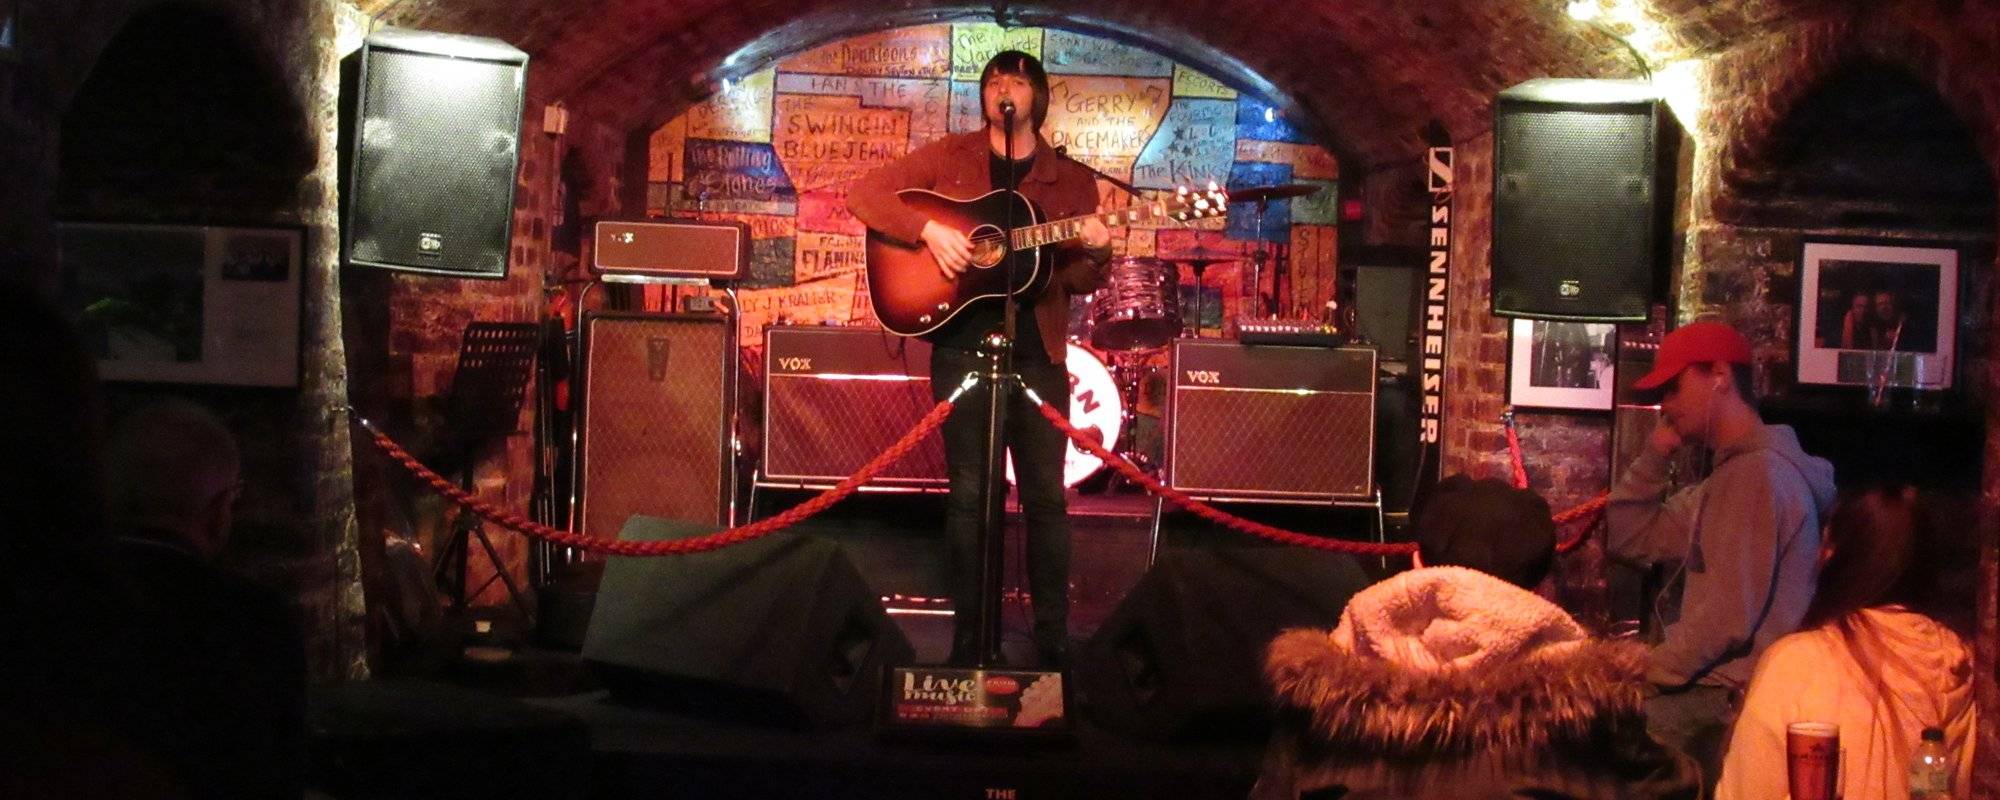 Visiting The Cavern Club, Liverpool